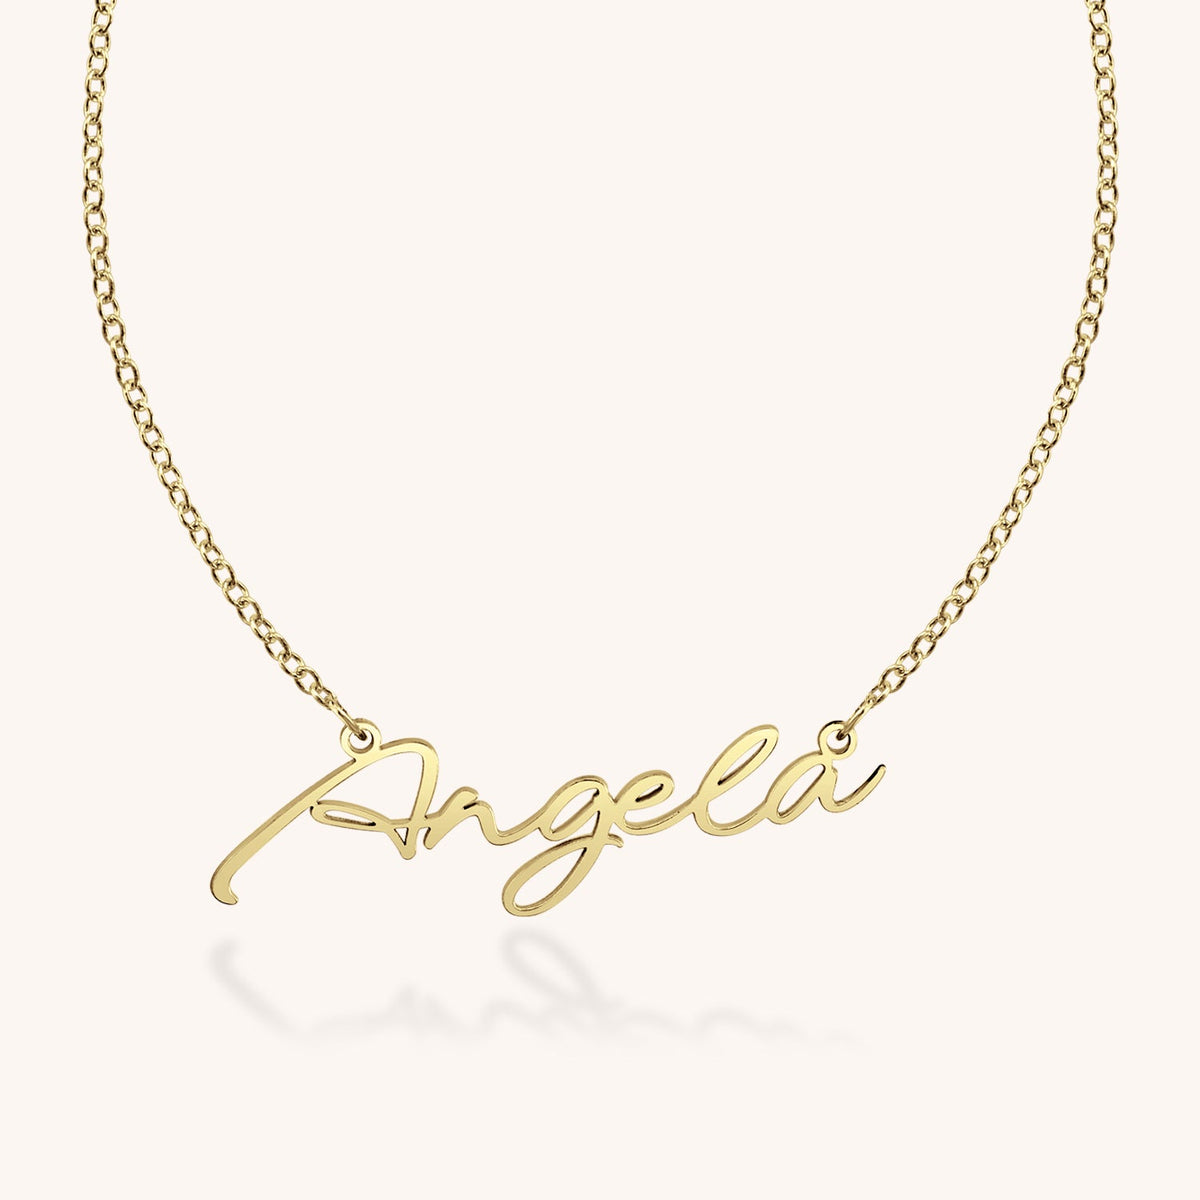 Sterling Silver Angela Nameplate Necklace